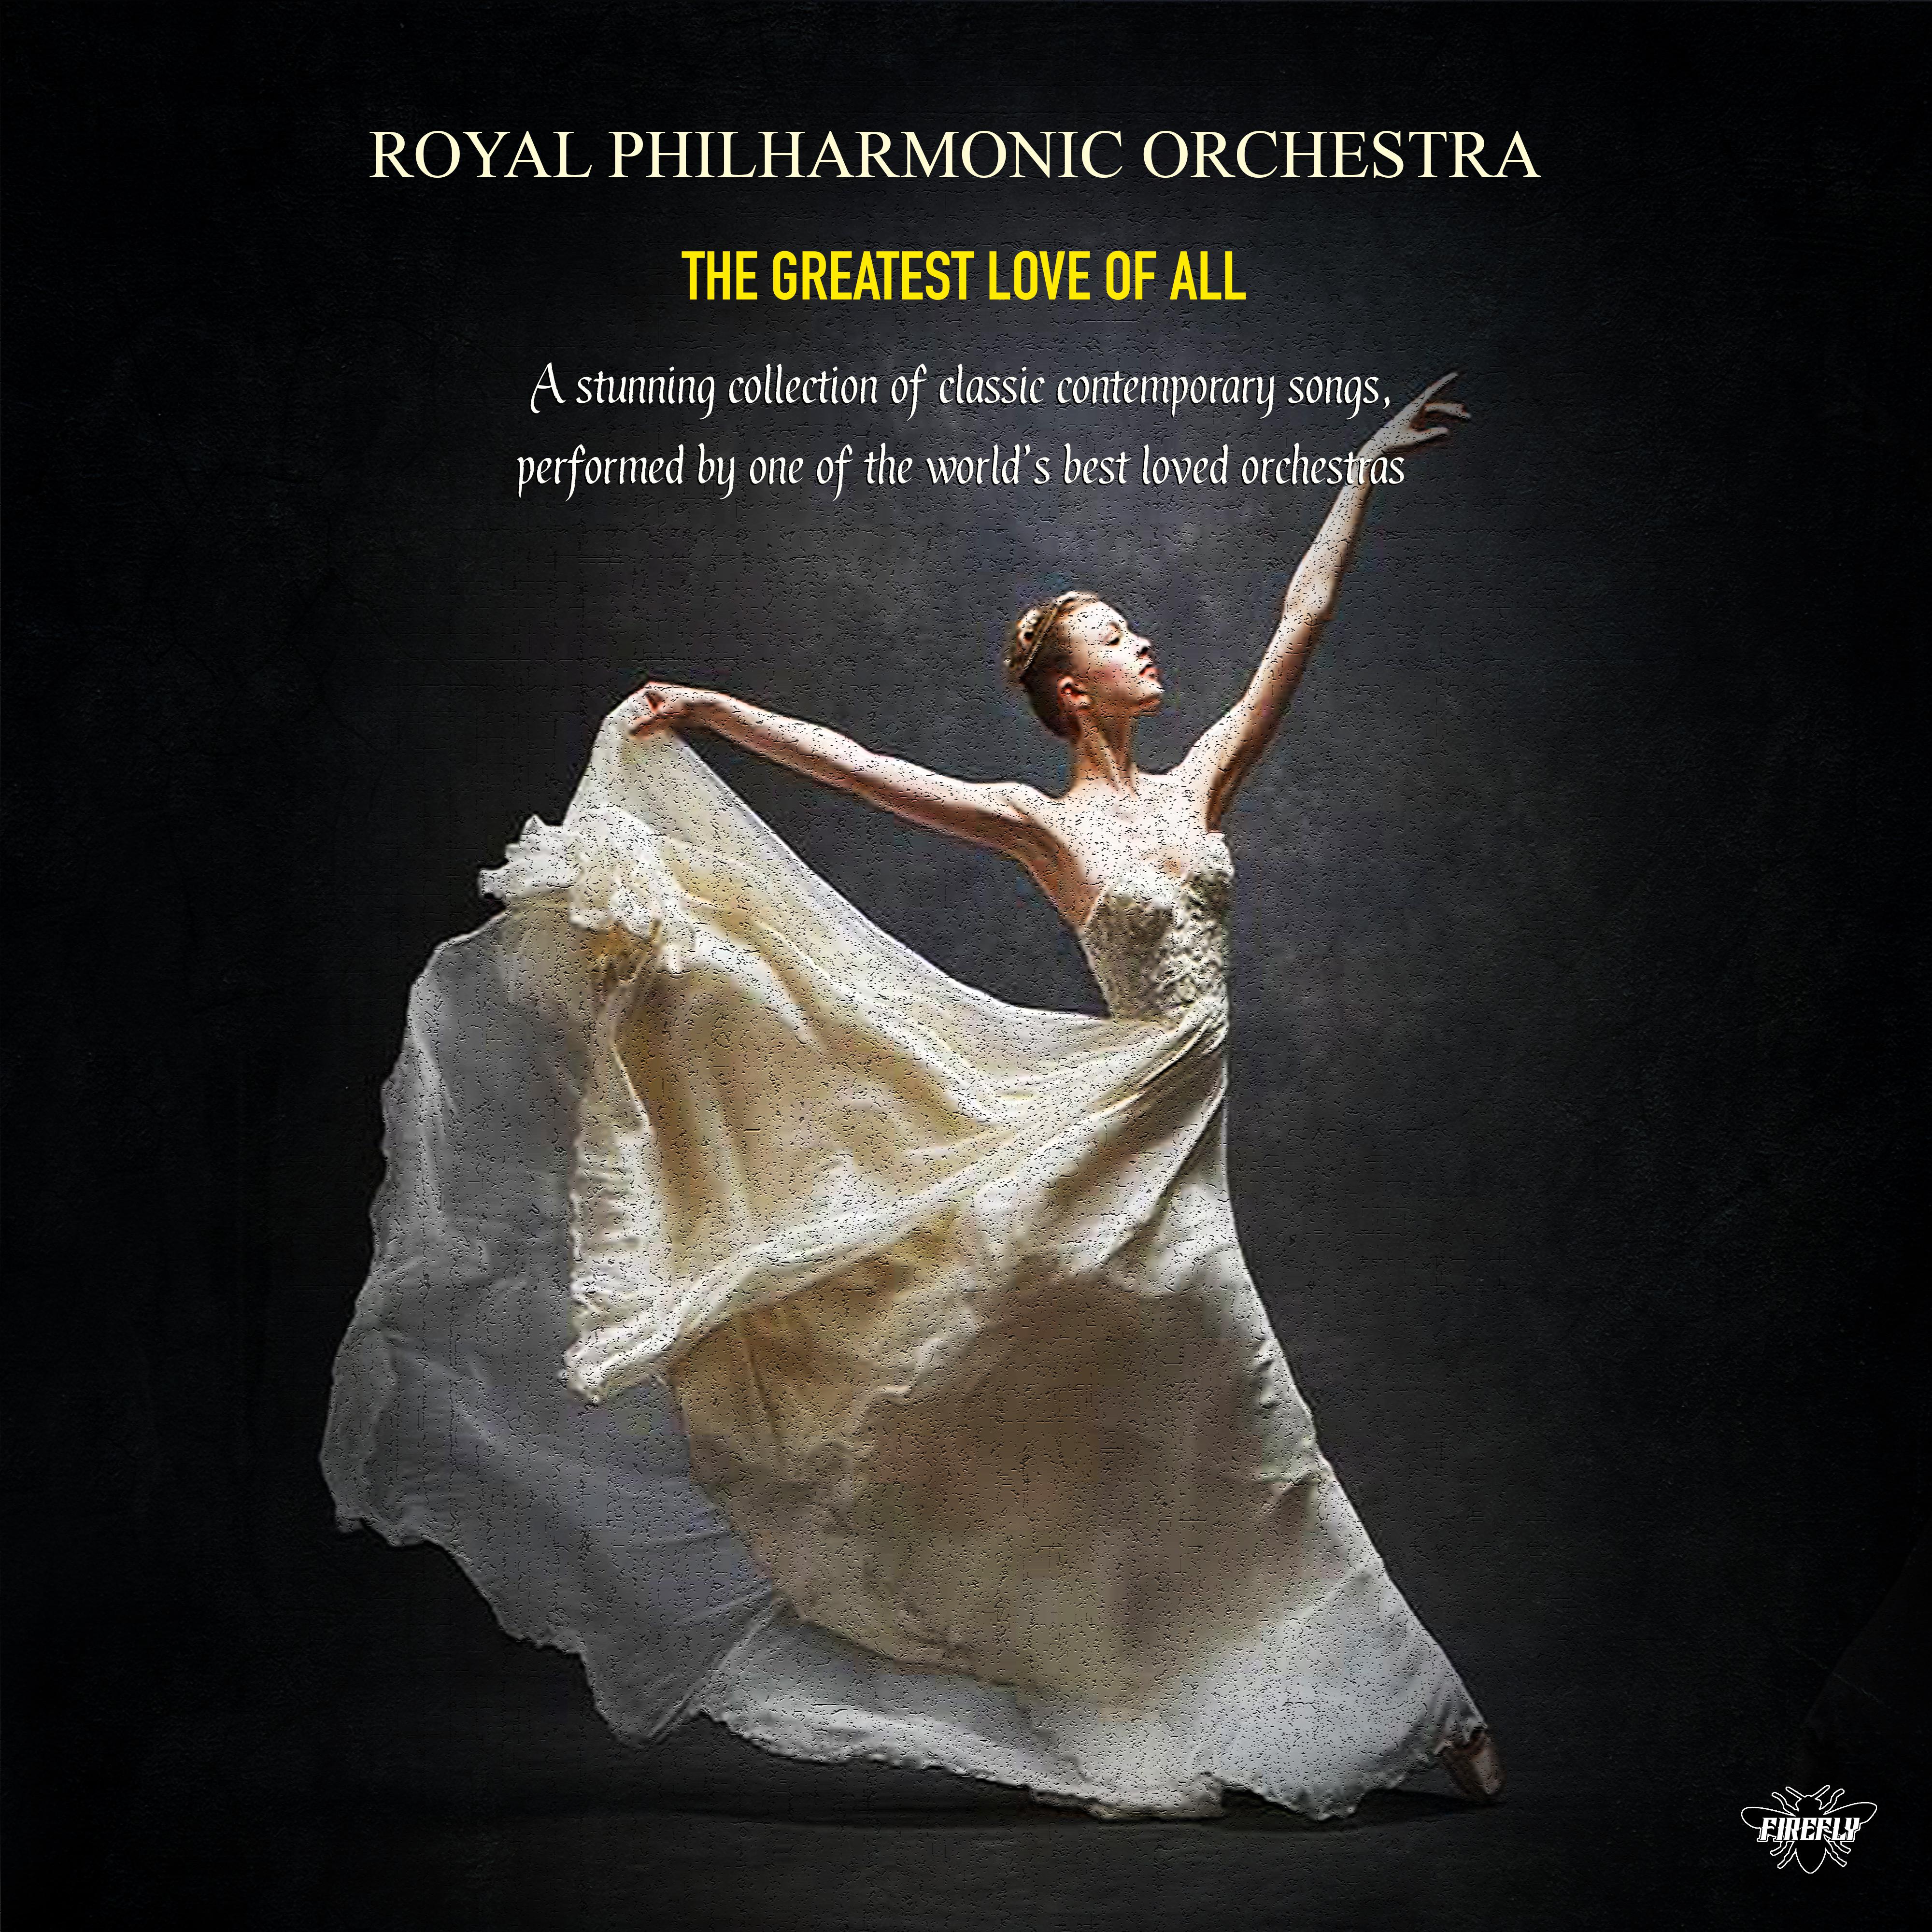 Royal Philharmonic Orchestra - The Greatest Love of All